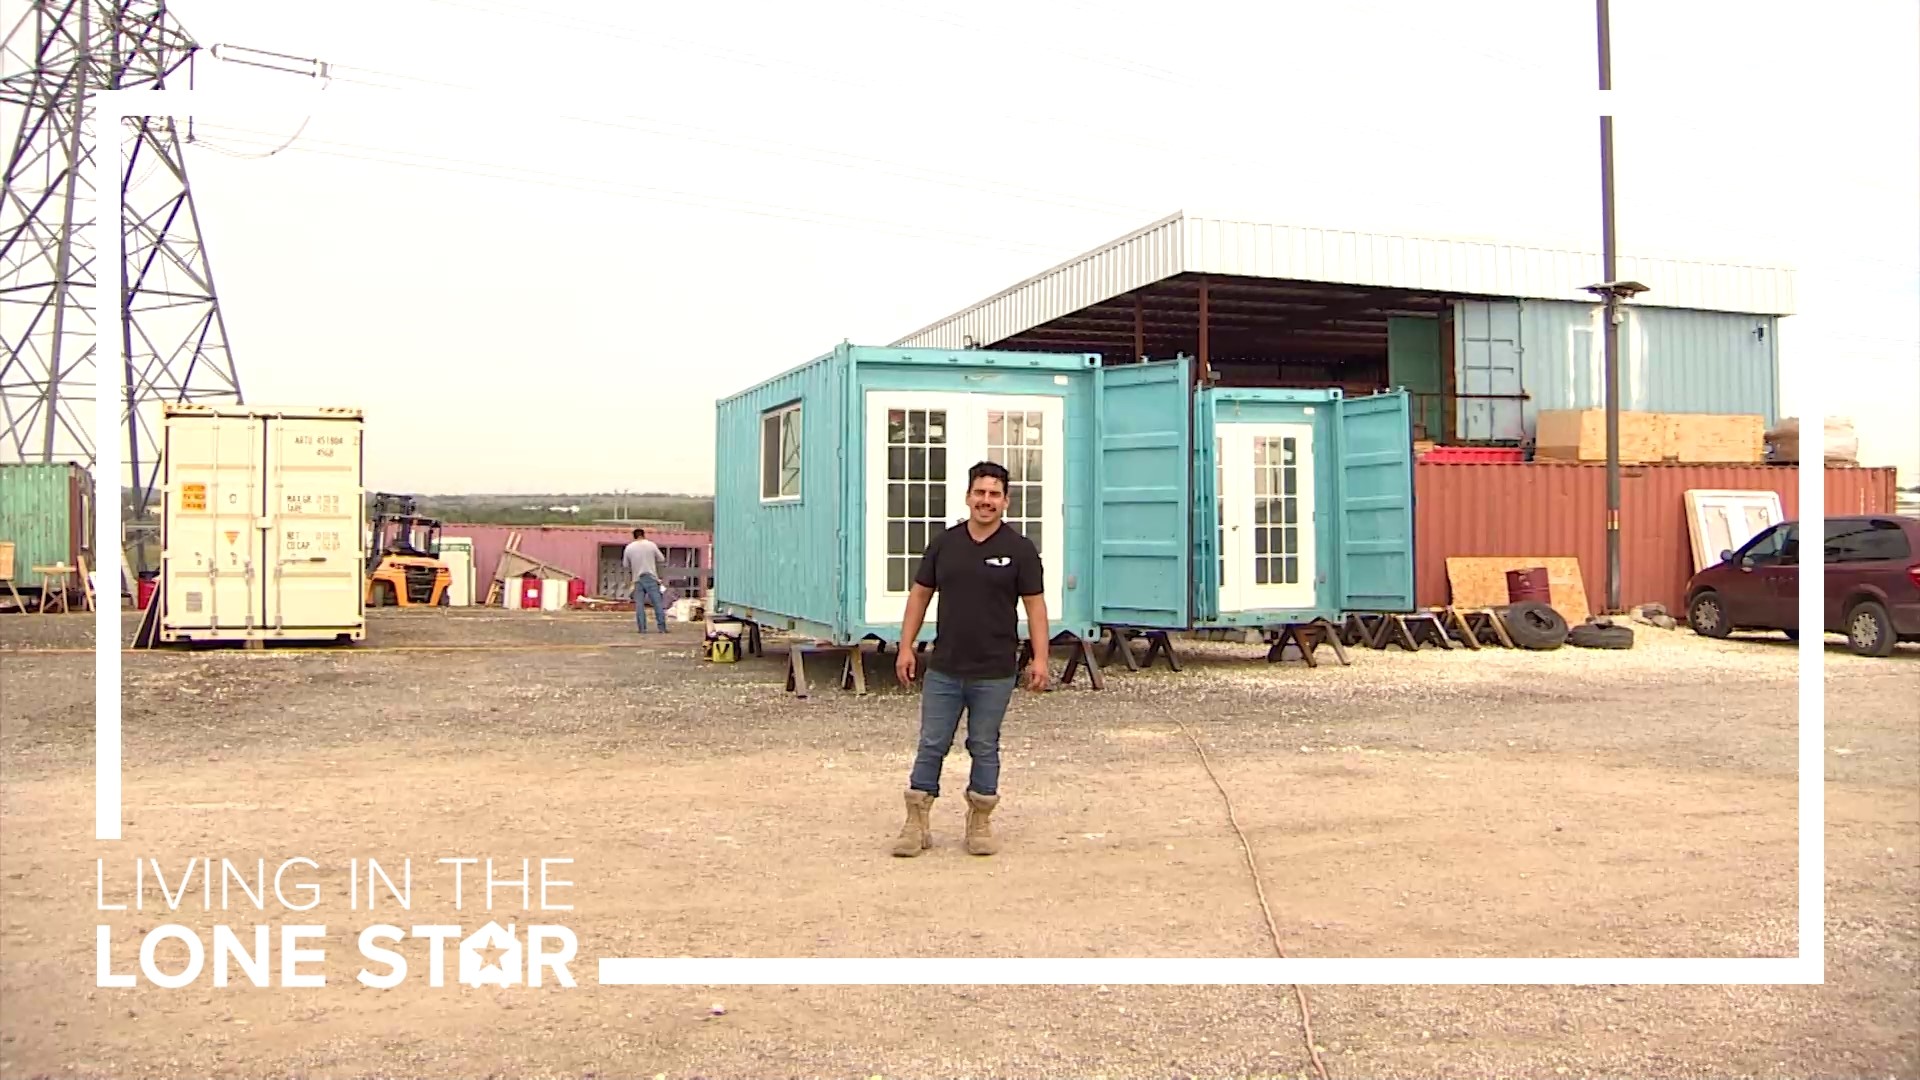 Meet Robert Banderas and the rest of the crew at Bob’s Containers, who specialize in turning shipping containers into dream homes.